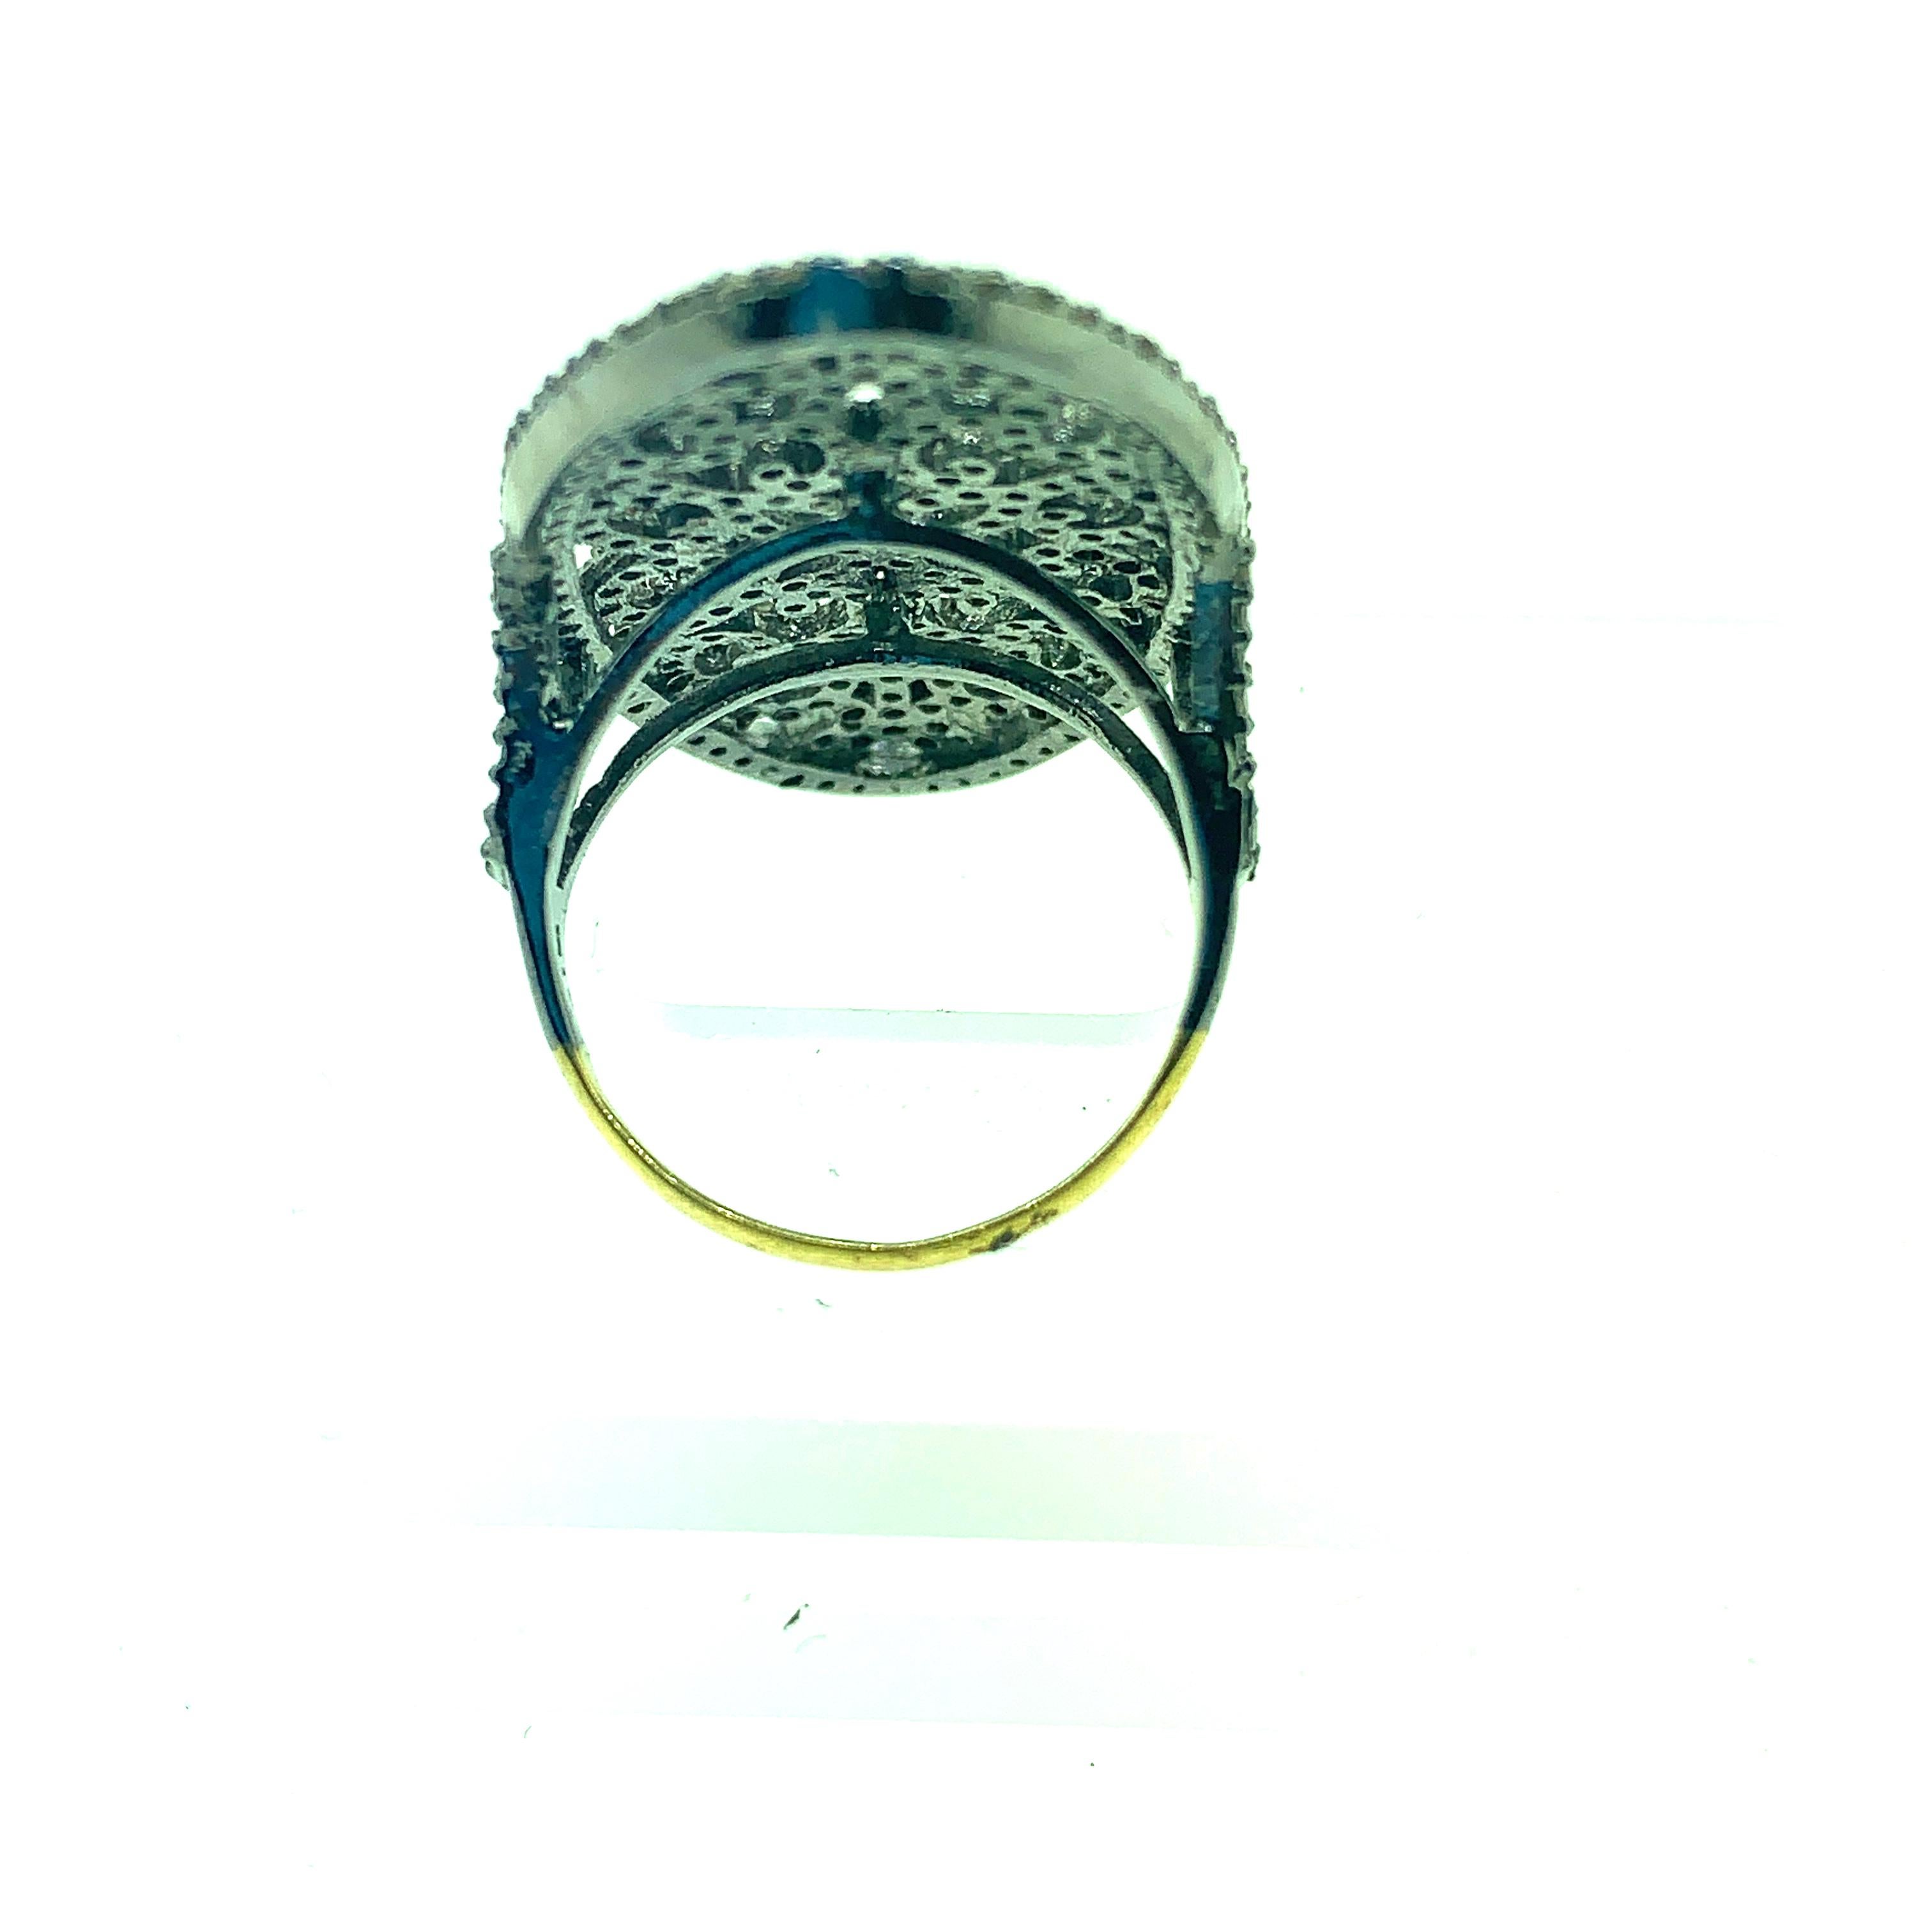 2.40 Carat Diamond Ring Oxidized Sterling Silver, 18 Karat Gold In New Condition For Sale In New York, NY